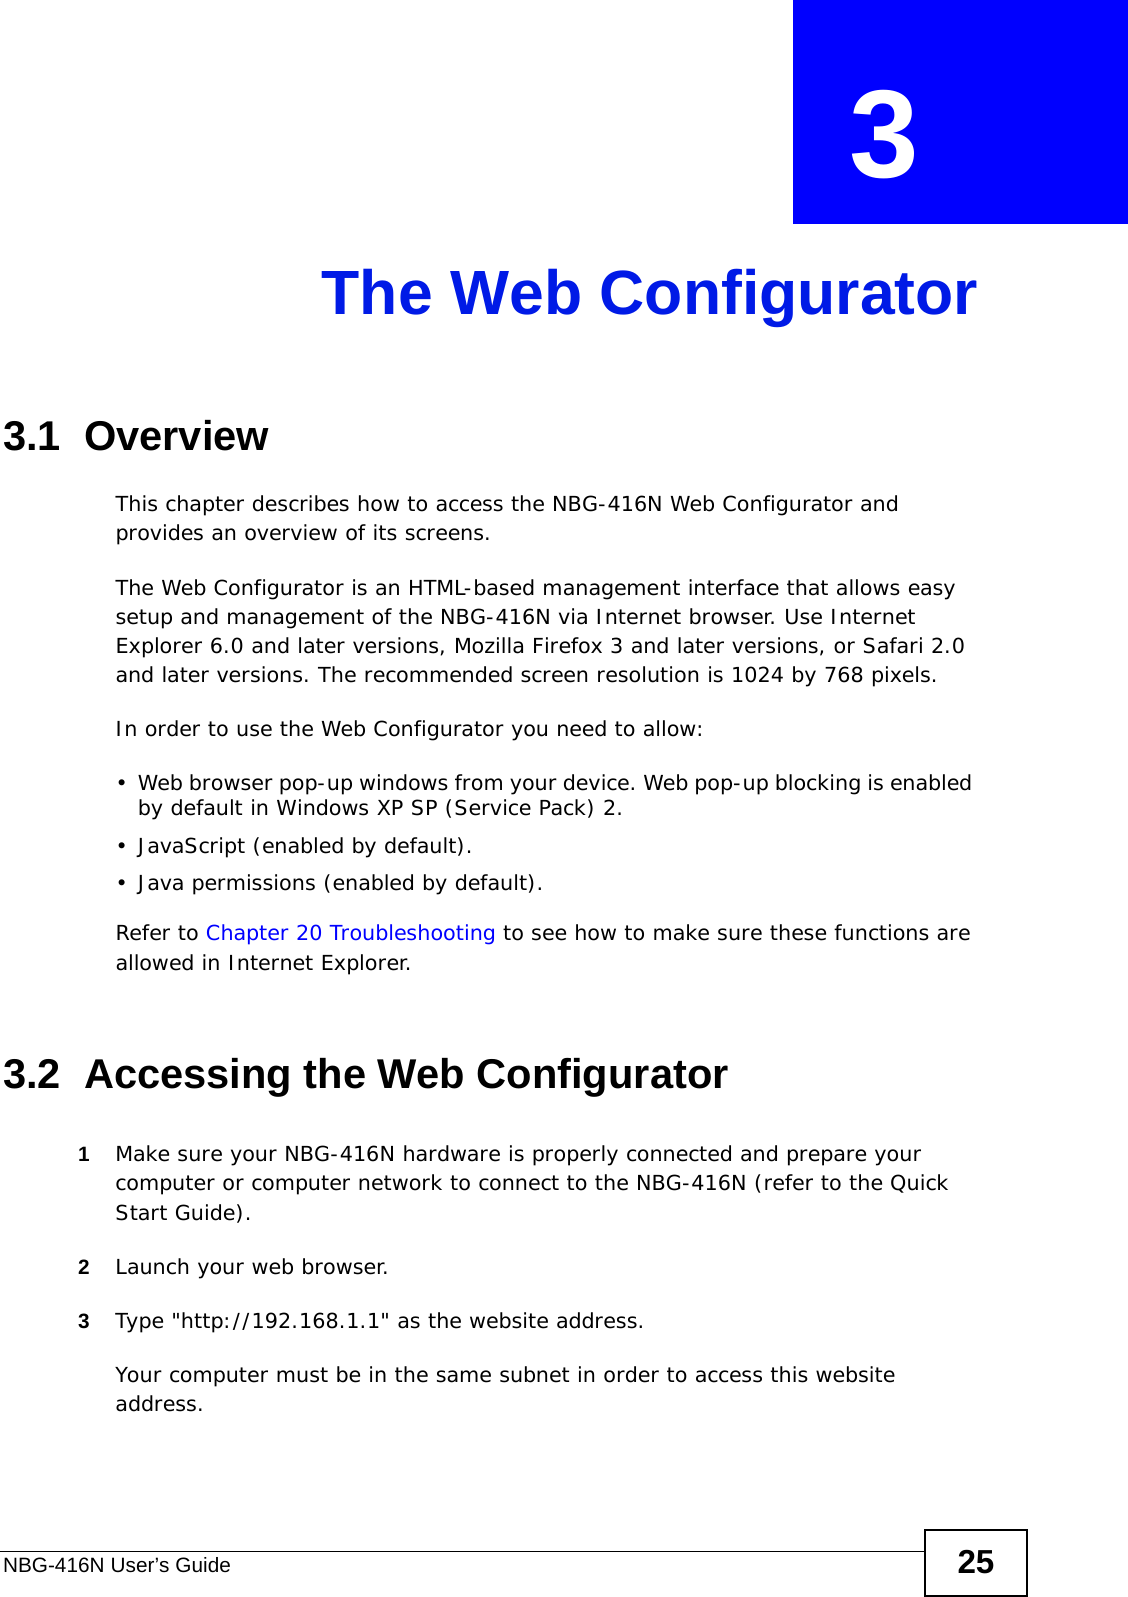 NBG-416N User’s Guide 25CHAPTER  3 The Web Configurator3.1  OverviewThis chapter describes how to access the NBG-416N Web Configurator and provides an overview of its screens.The Web Configurator is an HTML-based management interface that allows easy setup and management of the NBG-416N via Internet browser. Use Internet Explorer 6.0 and later versions, Mozilla Firefox 3 and later versions, or Safari 2.0 and later versions. The recommended screen resolution is 1024 by 768 pixels.In order to use the Web Configurator you need to allow:• Web browser pop-up windows from your device. Web pop-up blocking is enabled by default in Windows XP SP (Service Pack) 2.• JavaScript (enabled by default).• Java permissions (enabled by default).Refer to Chapter 20 Troubleshooting to see how to make sure these functions are allowed in Internet Explorer.3.2  Accessing the Web Configurator1Make sure your NBG-416N hardware is properly connected and prepare your computer or computer network to connect to the NBG-416N (refer to the Quick Start Guide).2Launch your web browser.3Type &quot;http://192.168.1.1&quot; as the website address. Your computer must be in the same subnet in order to access this website address.